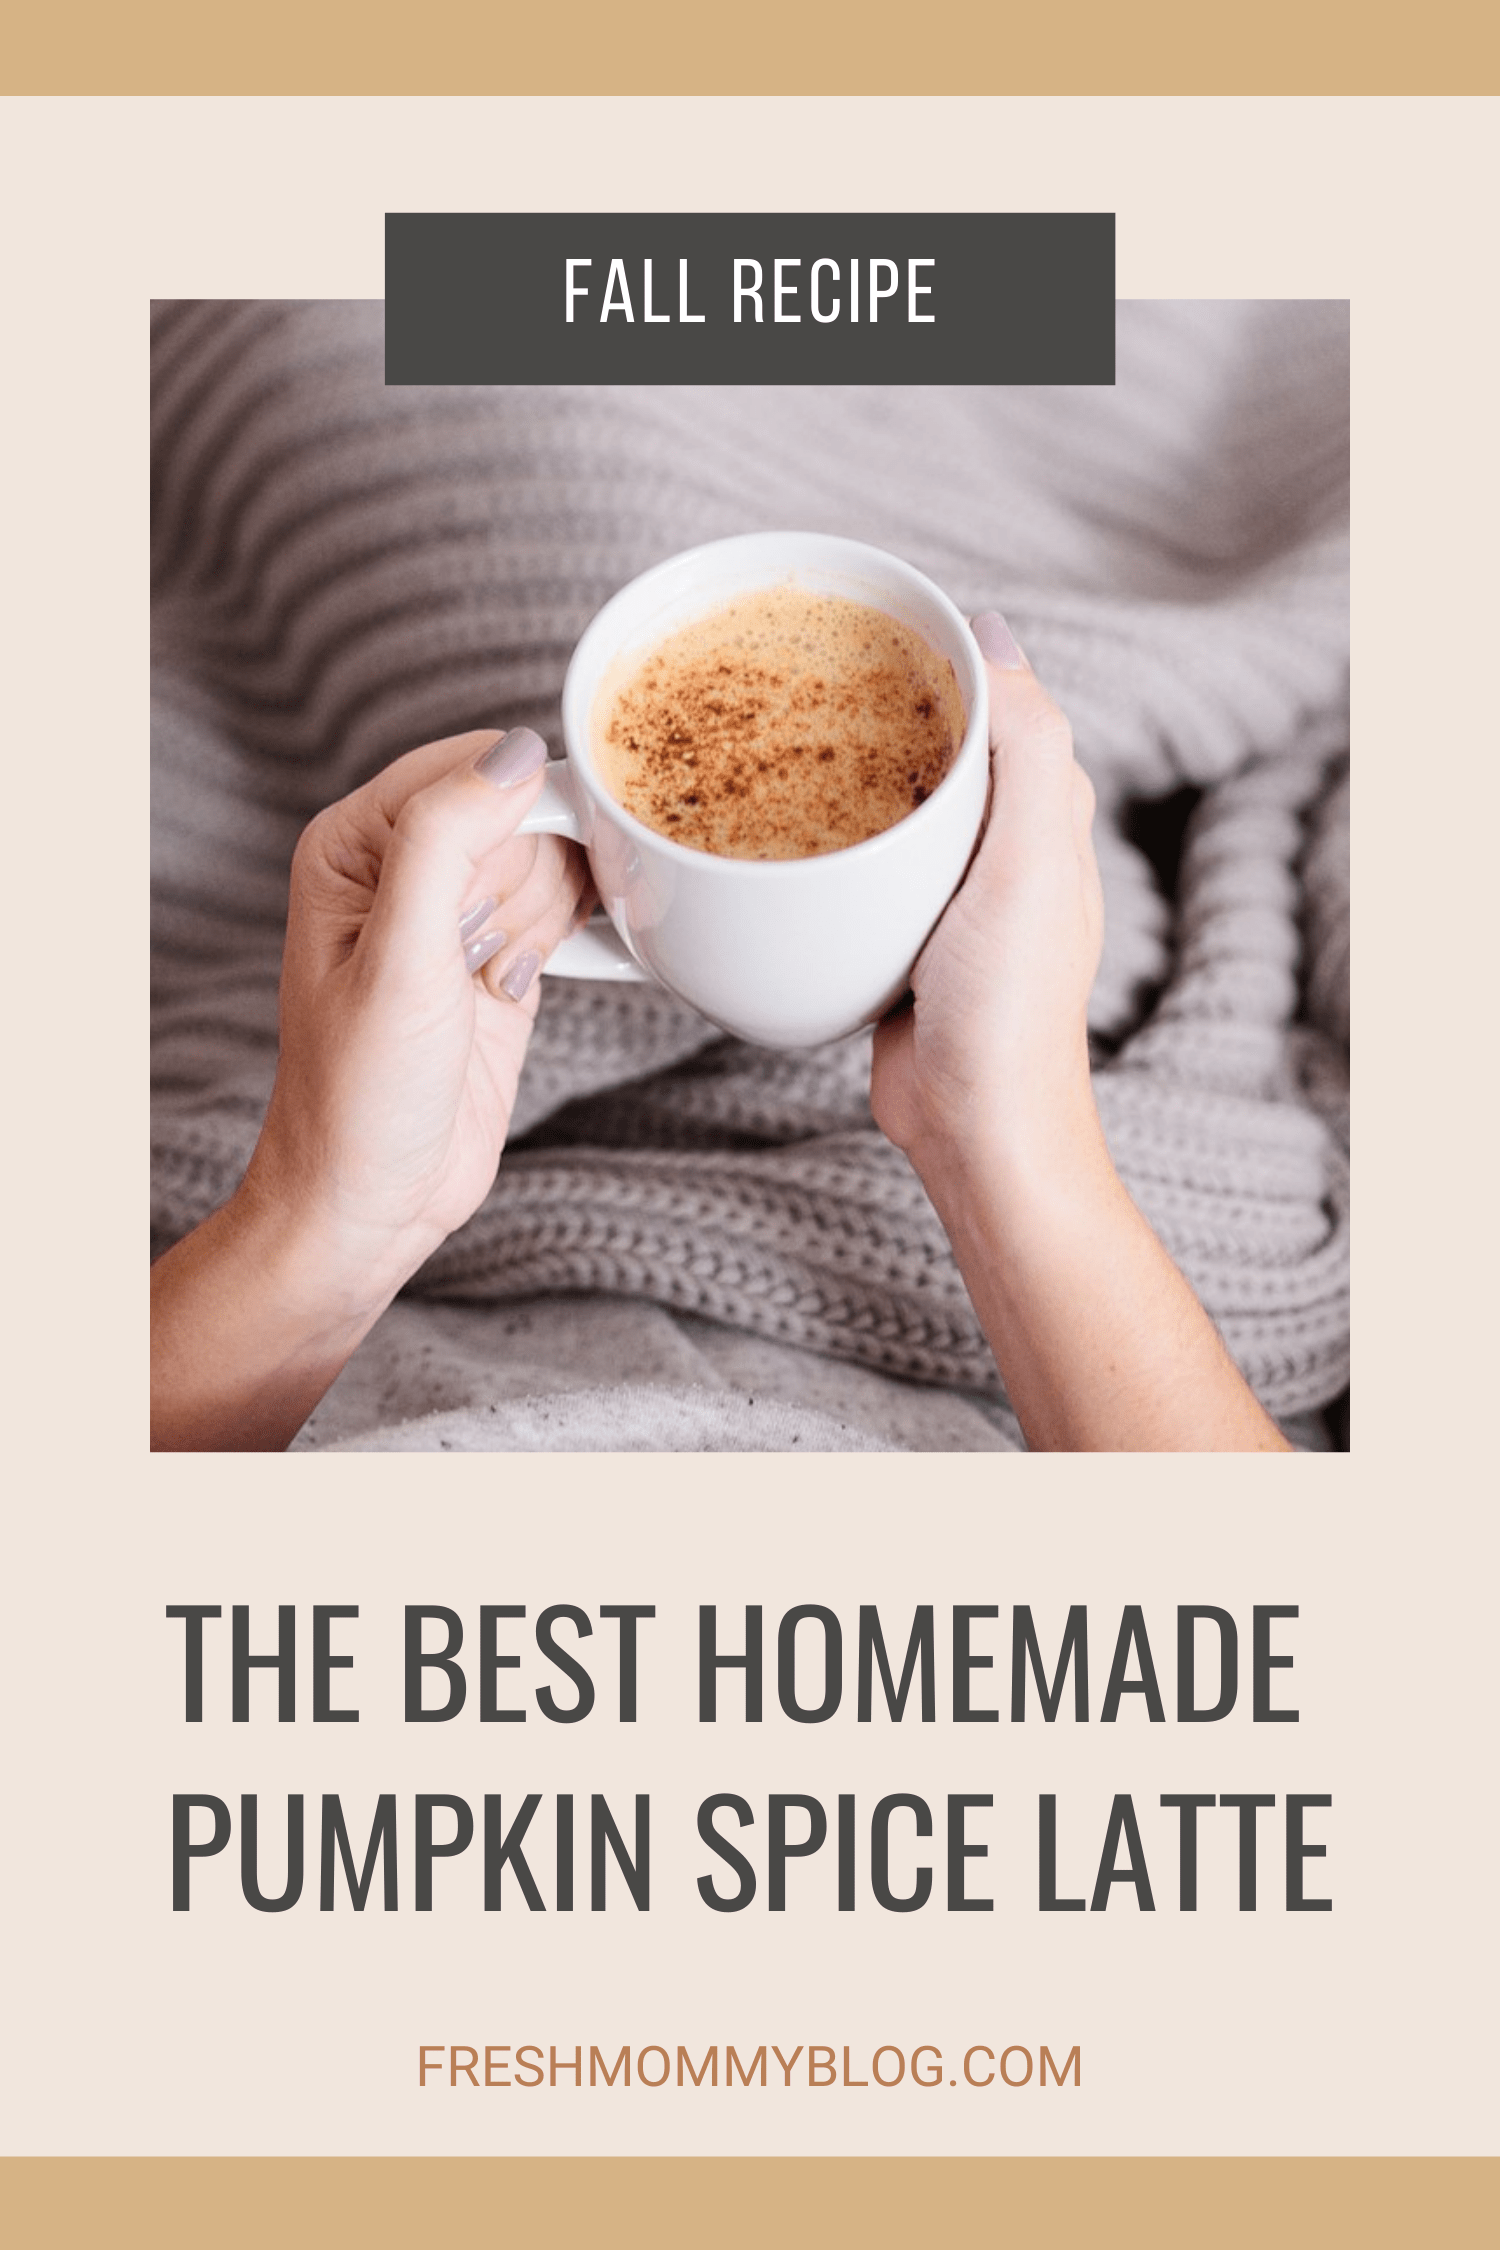 Homemade Pumpkin Spice Latte. Whether you want it clean and skinny (vegan too!) or you love adding in the cream and sugar, this homemade pumpkin spice latte recipe totally takes the cake. Save money and try your own PSL! | Homemade Pumpkin Spice Latte Recipe featured by popular Florida lifestyle blogger, Tabitha Blue of Fresh Mommy Blog